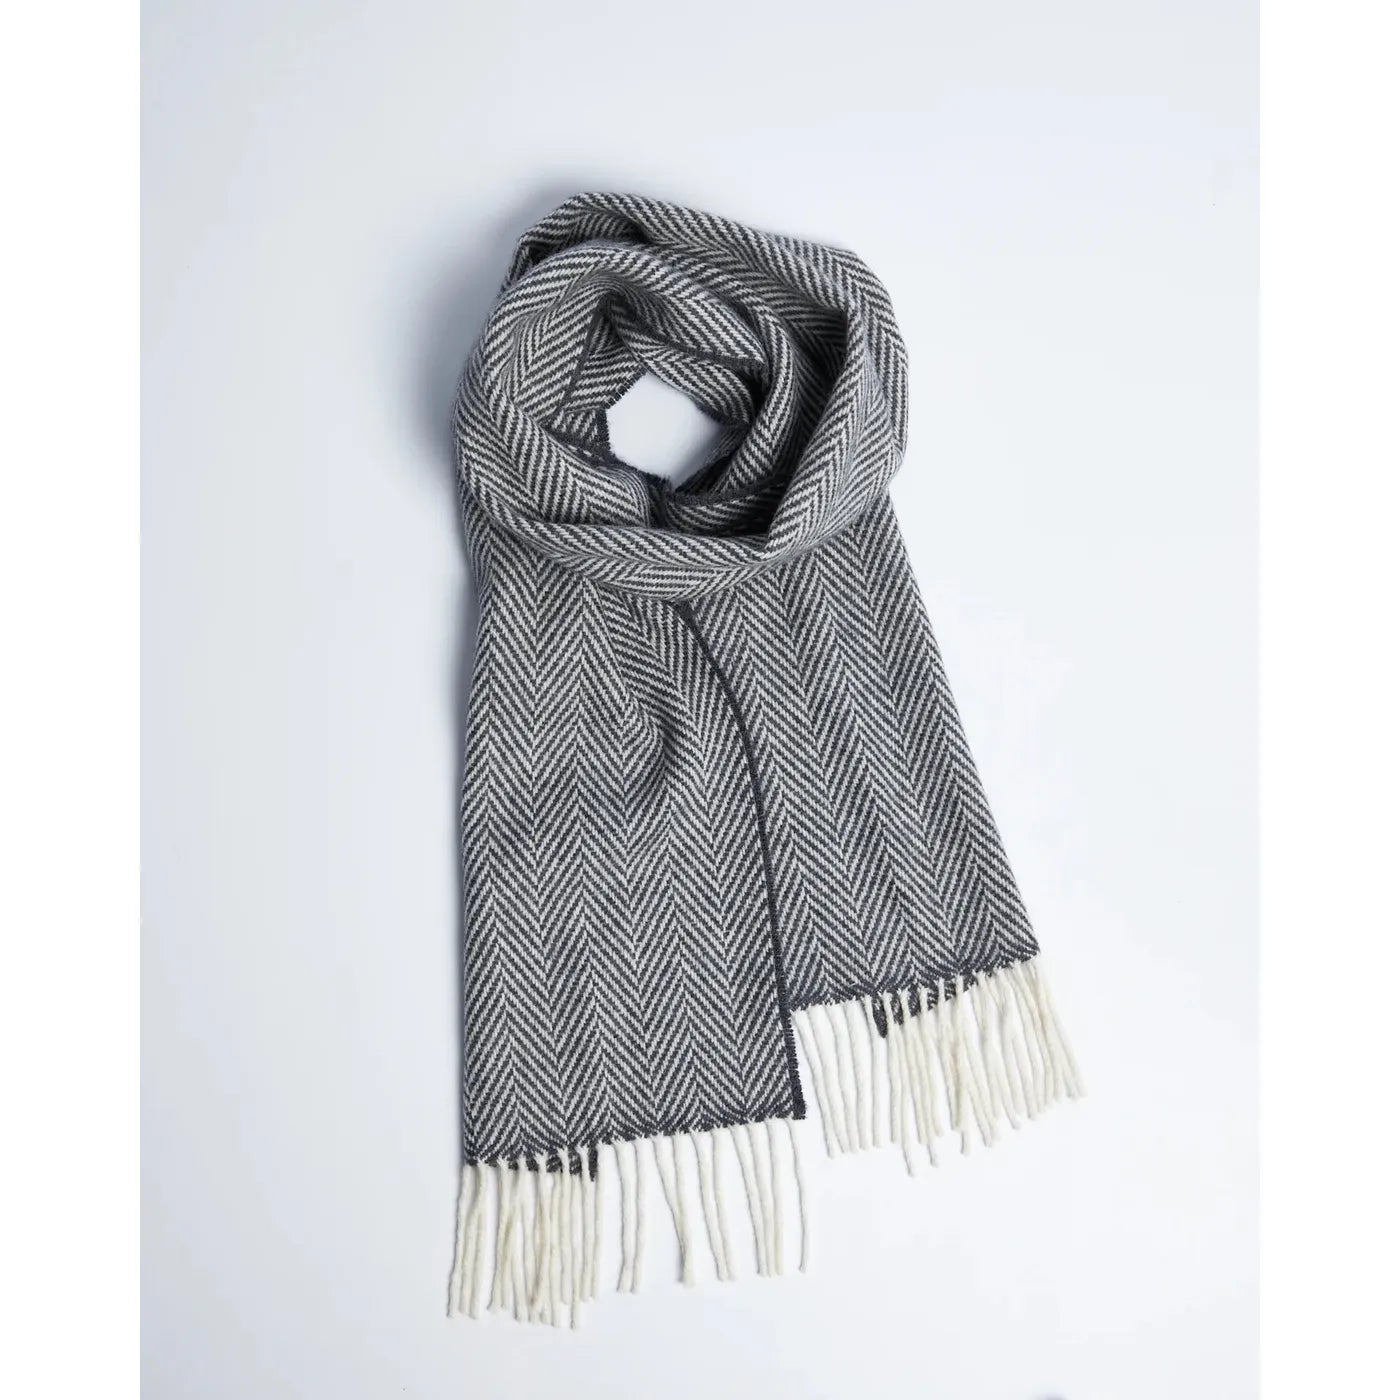 Oxford and White Cashmere Blend Scarf - Foxford